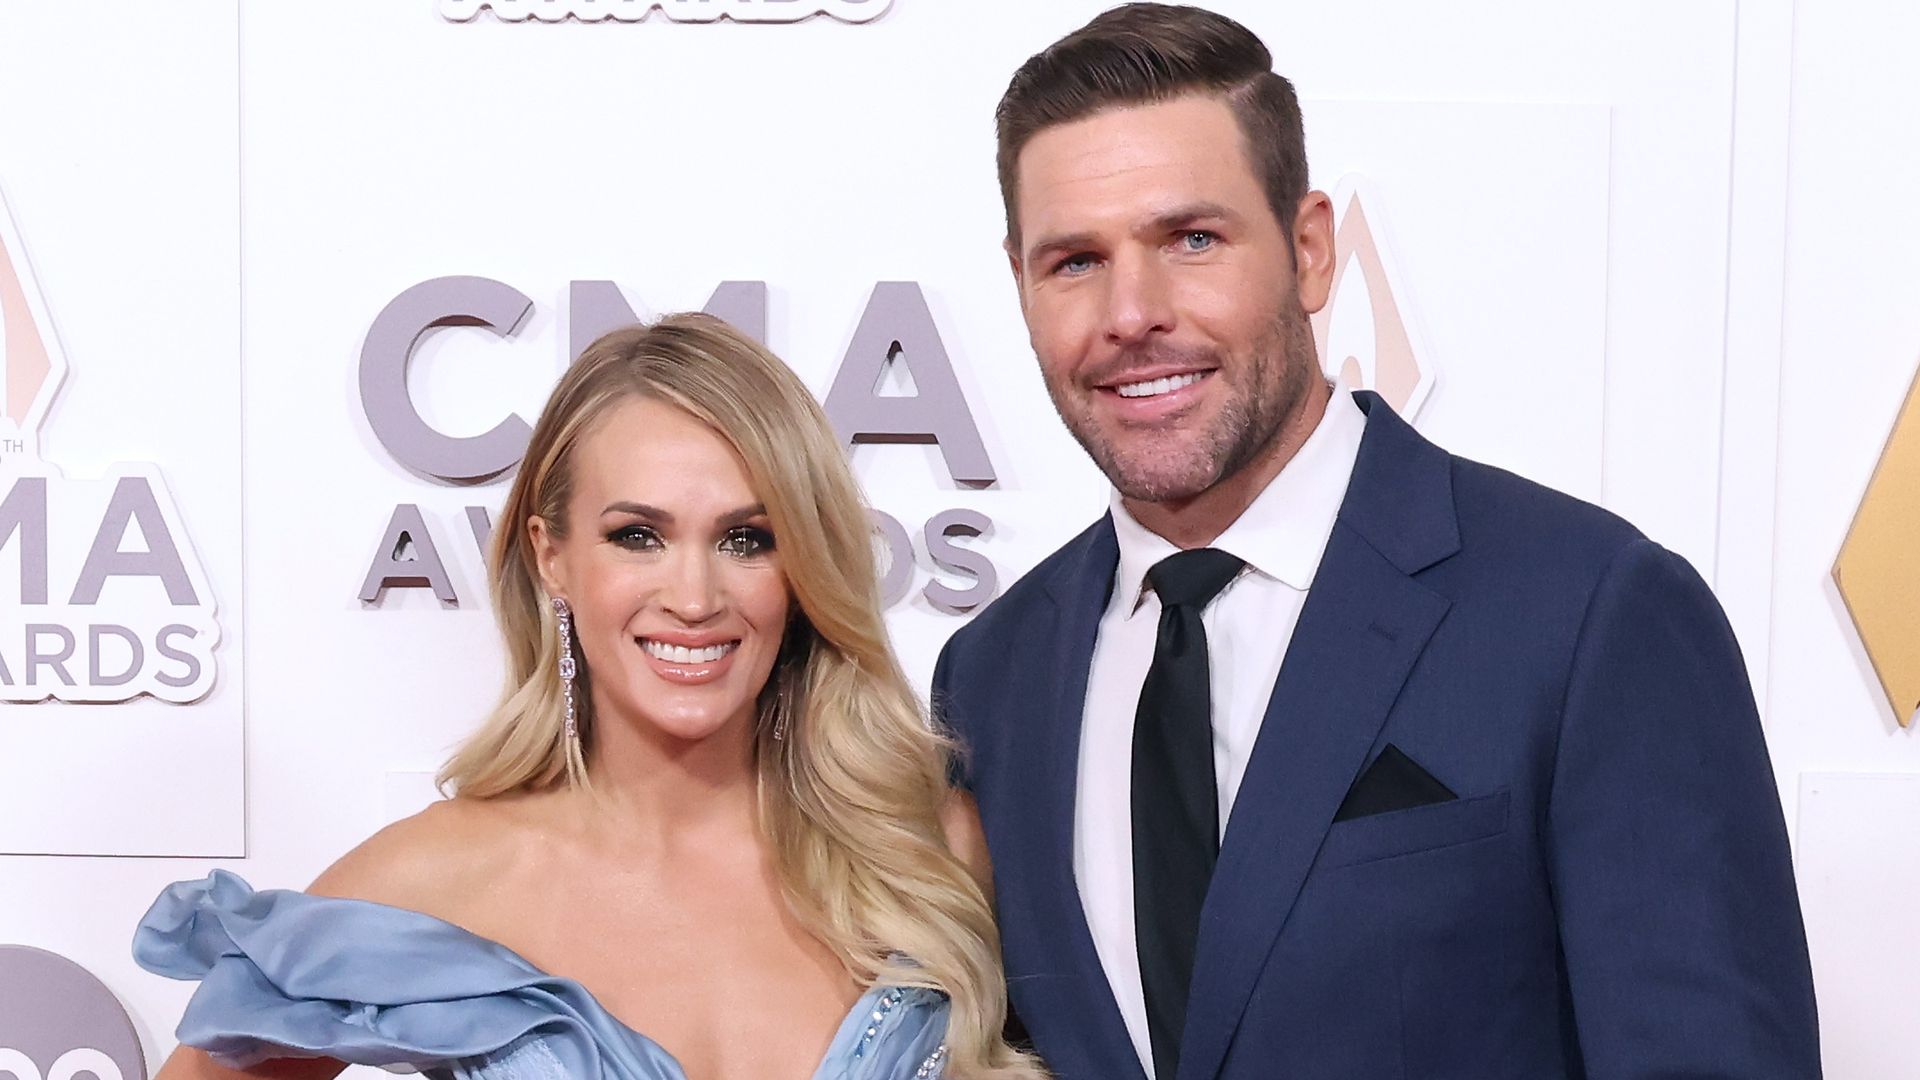 Carrie Underwood and Mike Fisher welcome new additions to their